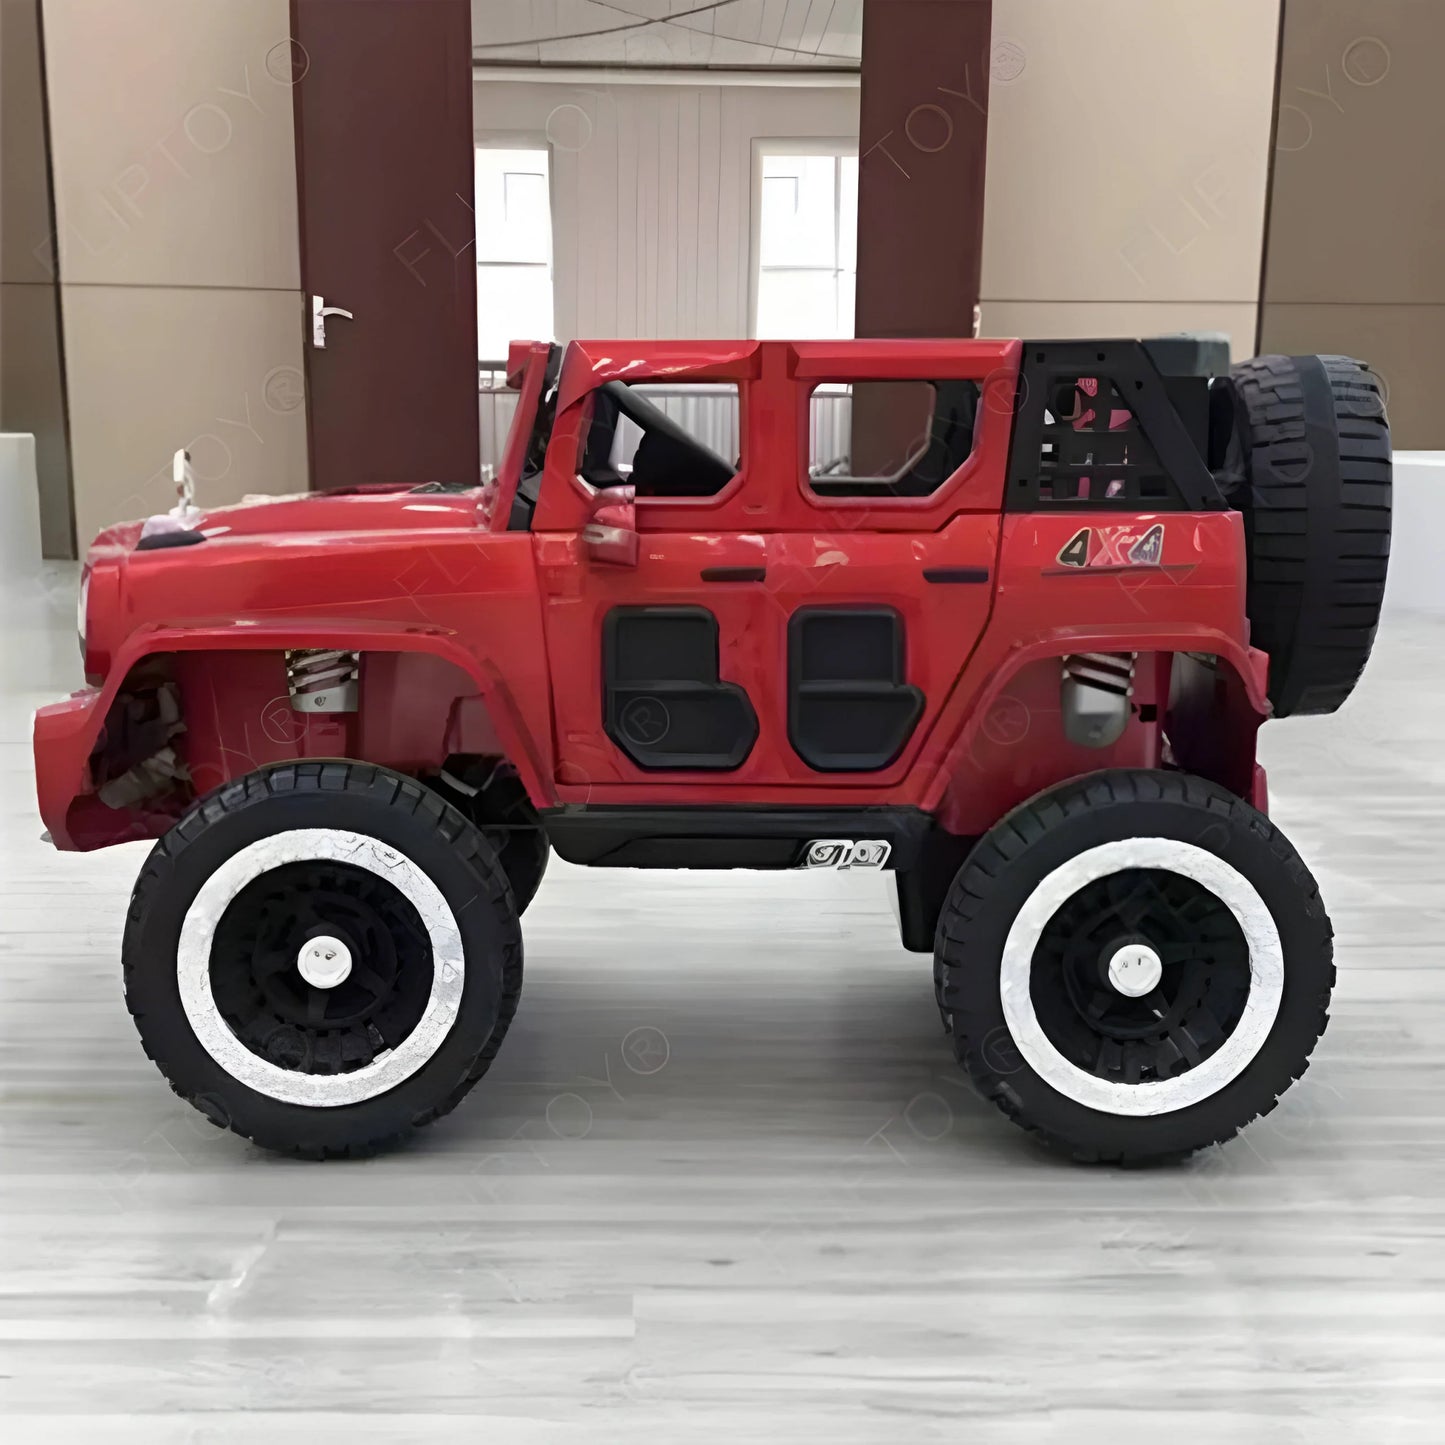 Fliptoy® | Kids ride on jeep | 4x4 | 2 seater | for age group 2-7 year | MP3 music player | Big jeep